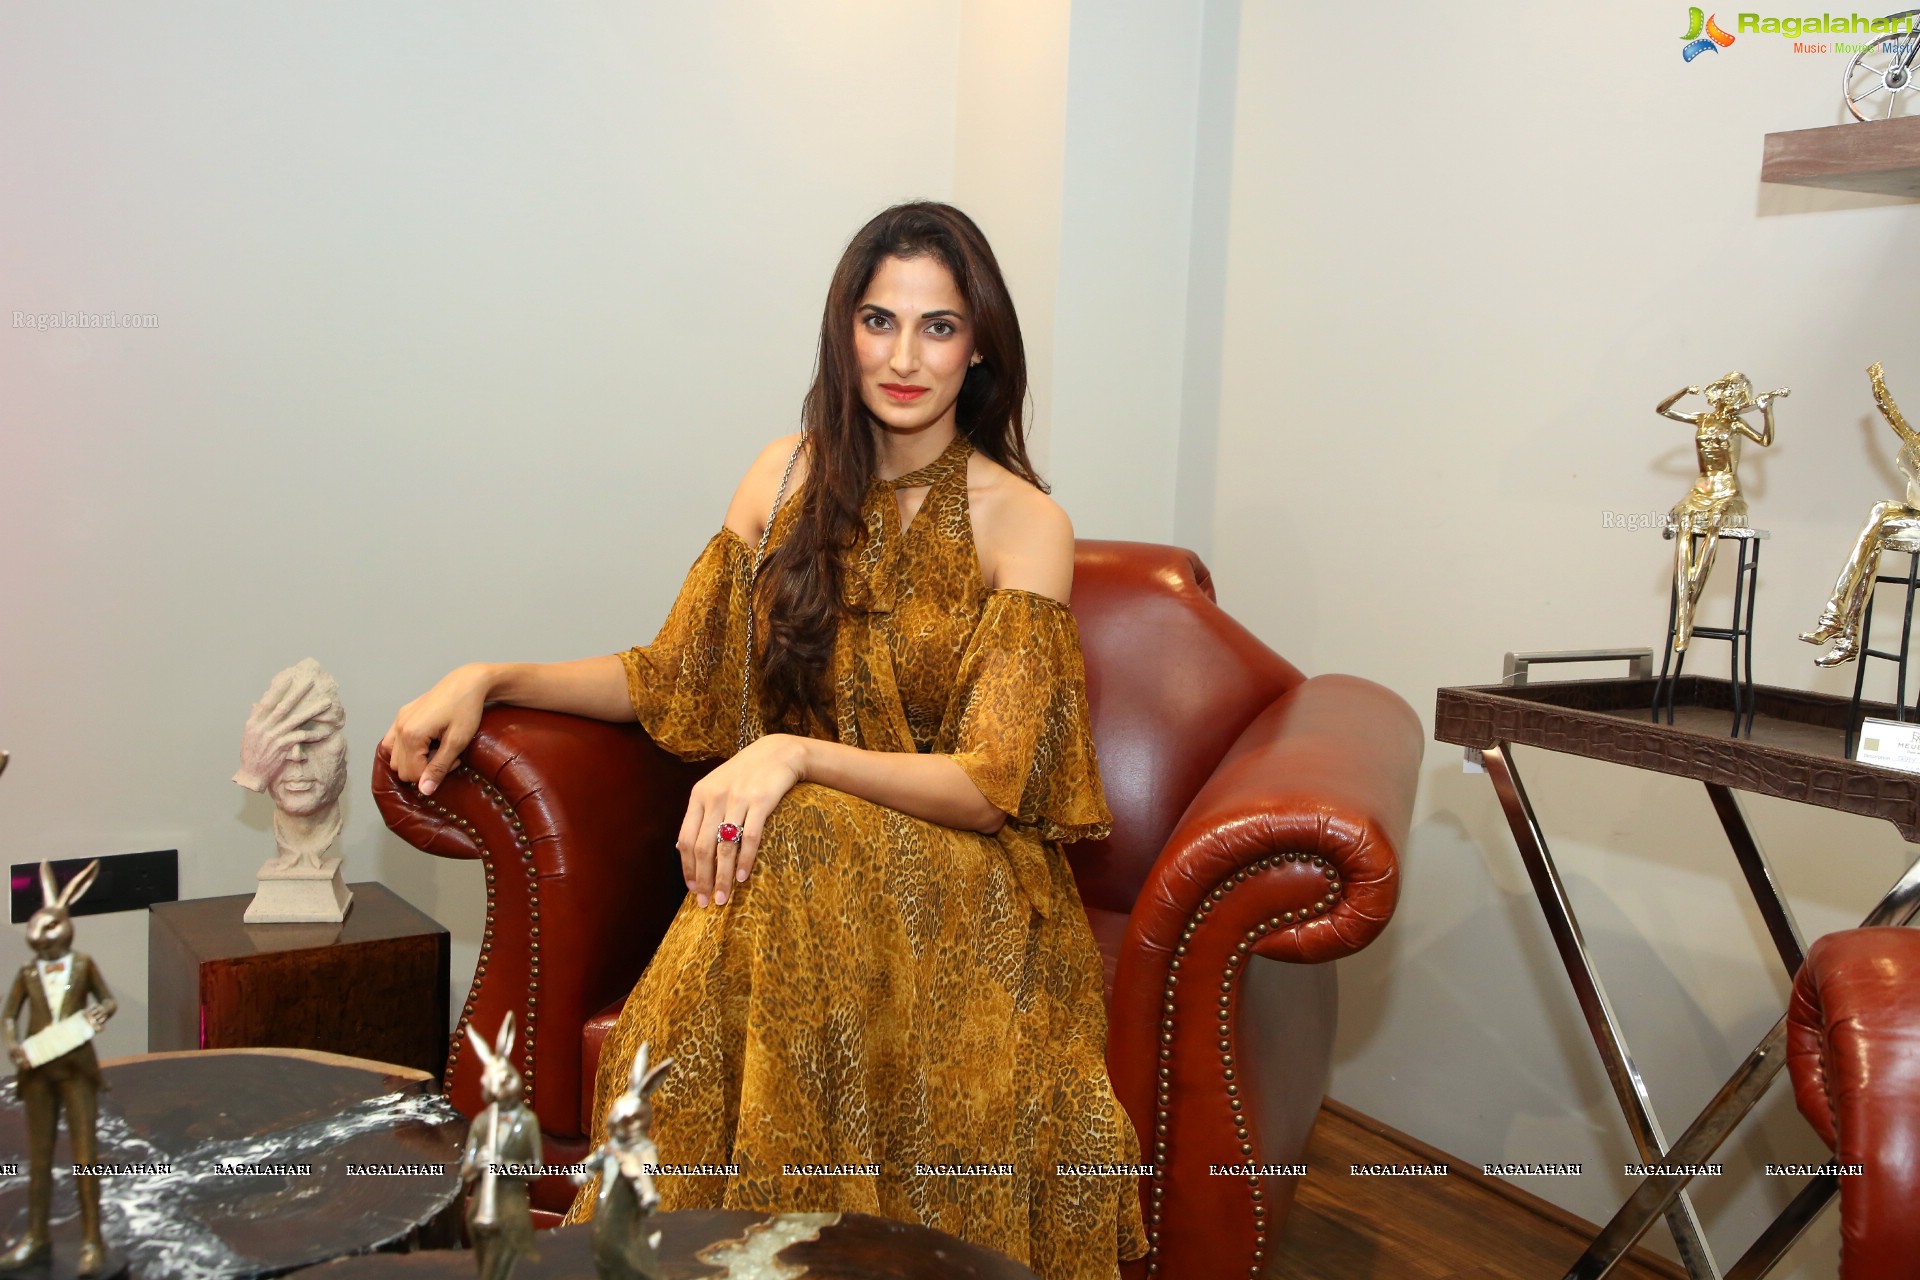 Shilpa Reddy at Meubles, Hyderabad (High Definition Photos)